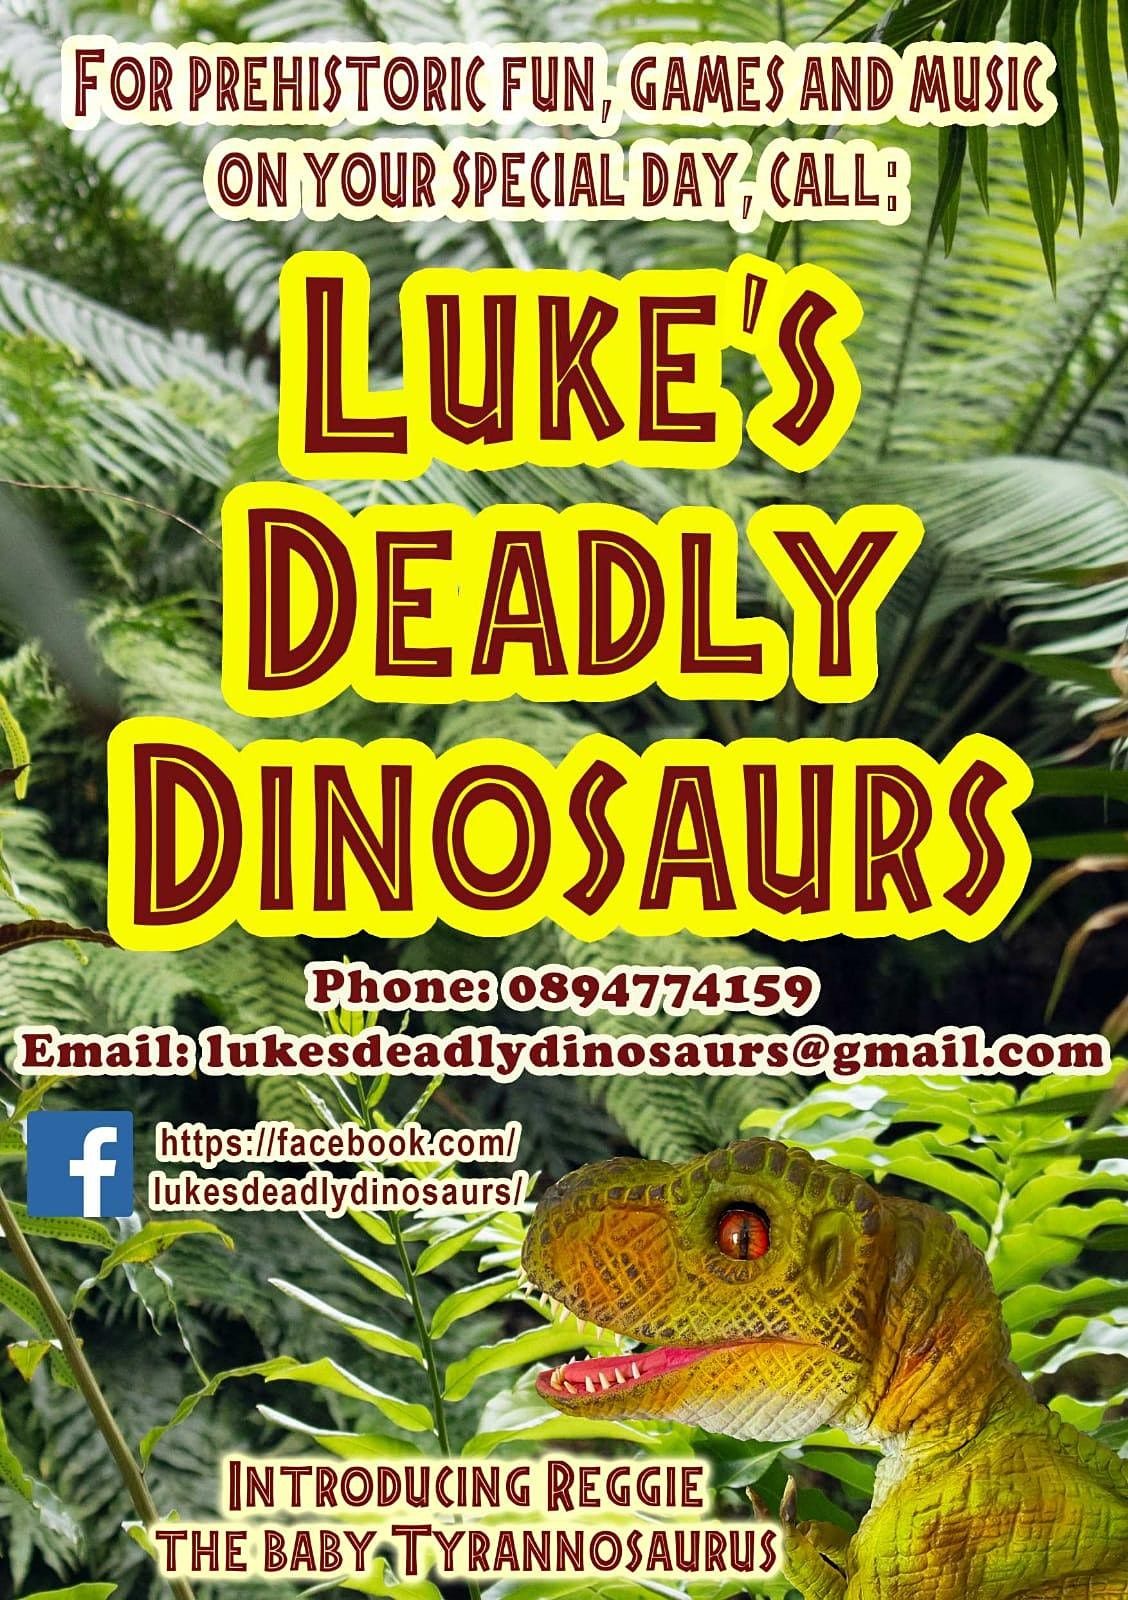 Copy of Luke's Deadly Dinosaurs - Suitable for all ages